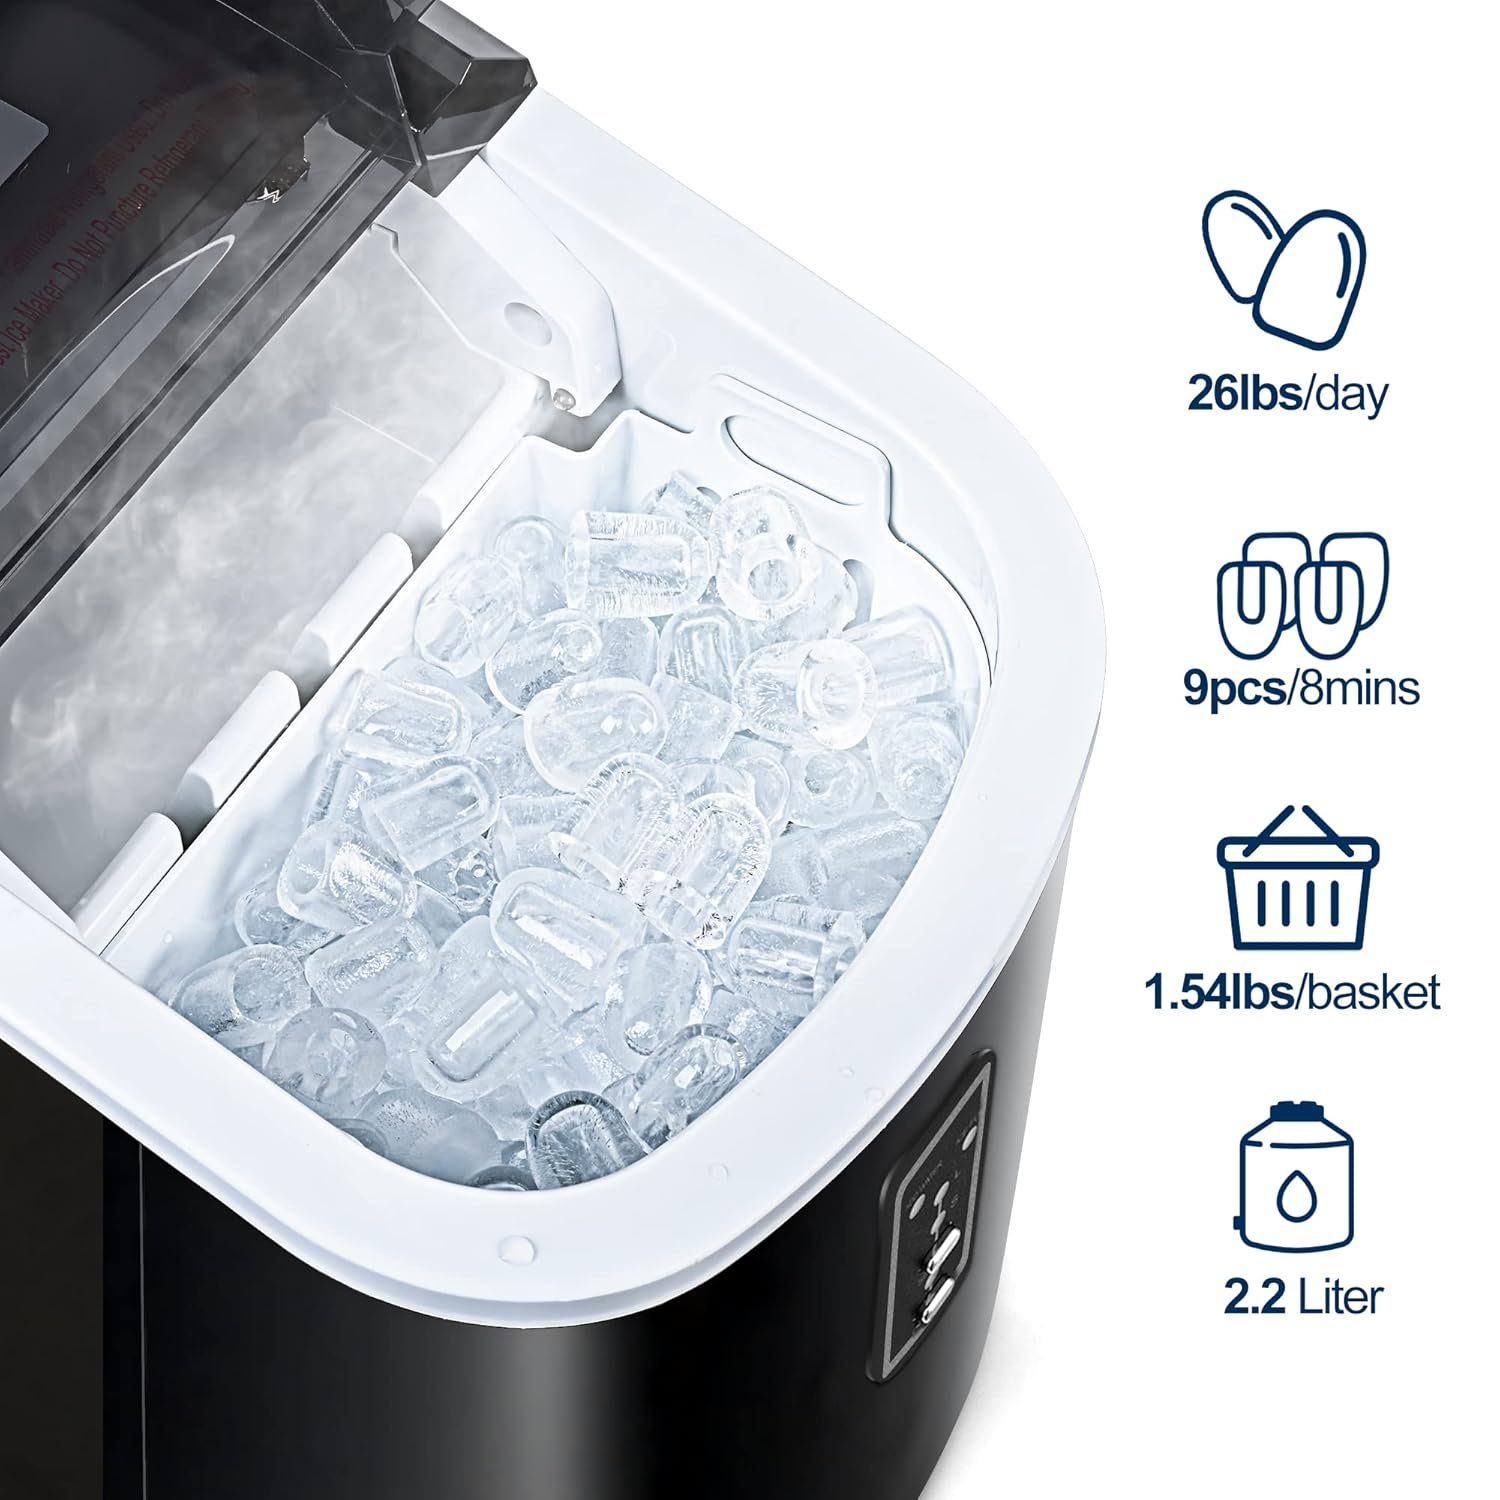 Compact Portable Ice Maker Review